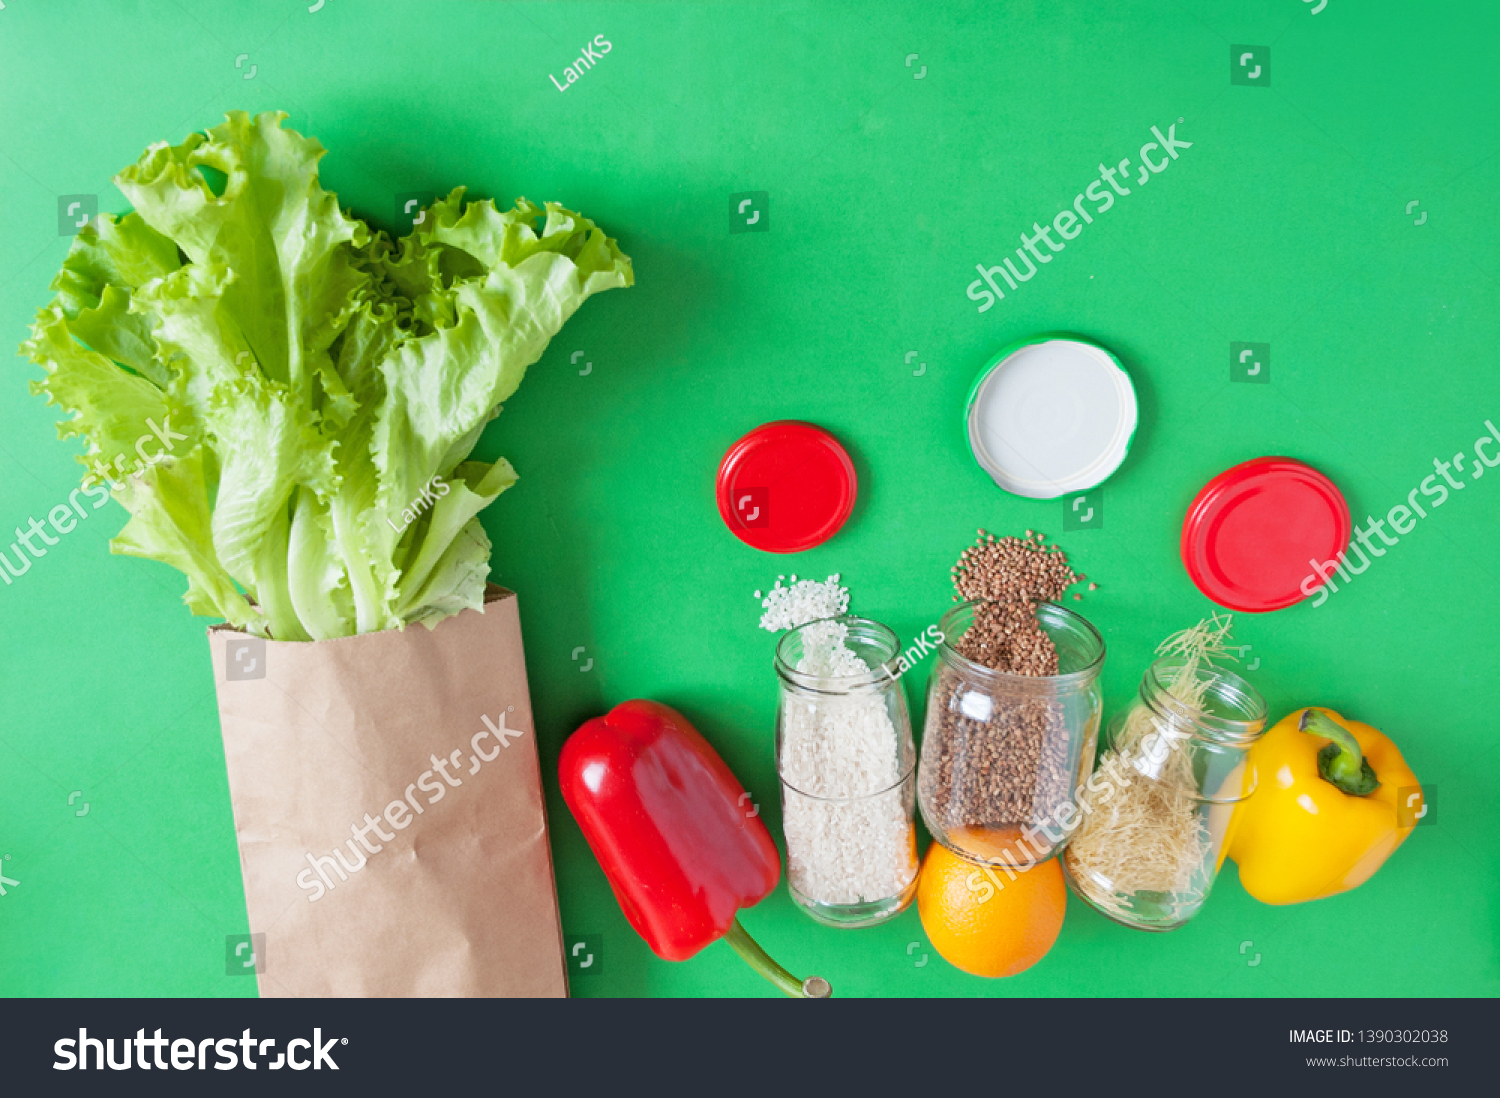 Download Fresh Lettuce Paper Bag Red Yellow Stock Photo Edit Now 1390302038 Yellowimages Mockups